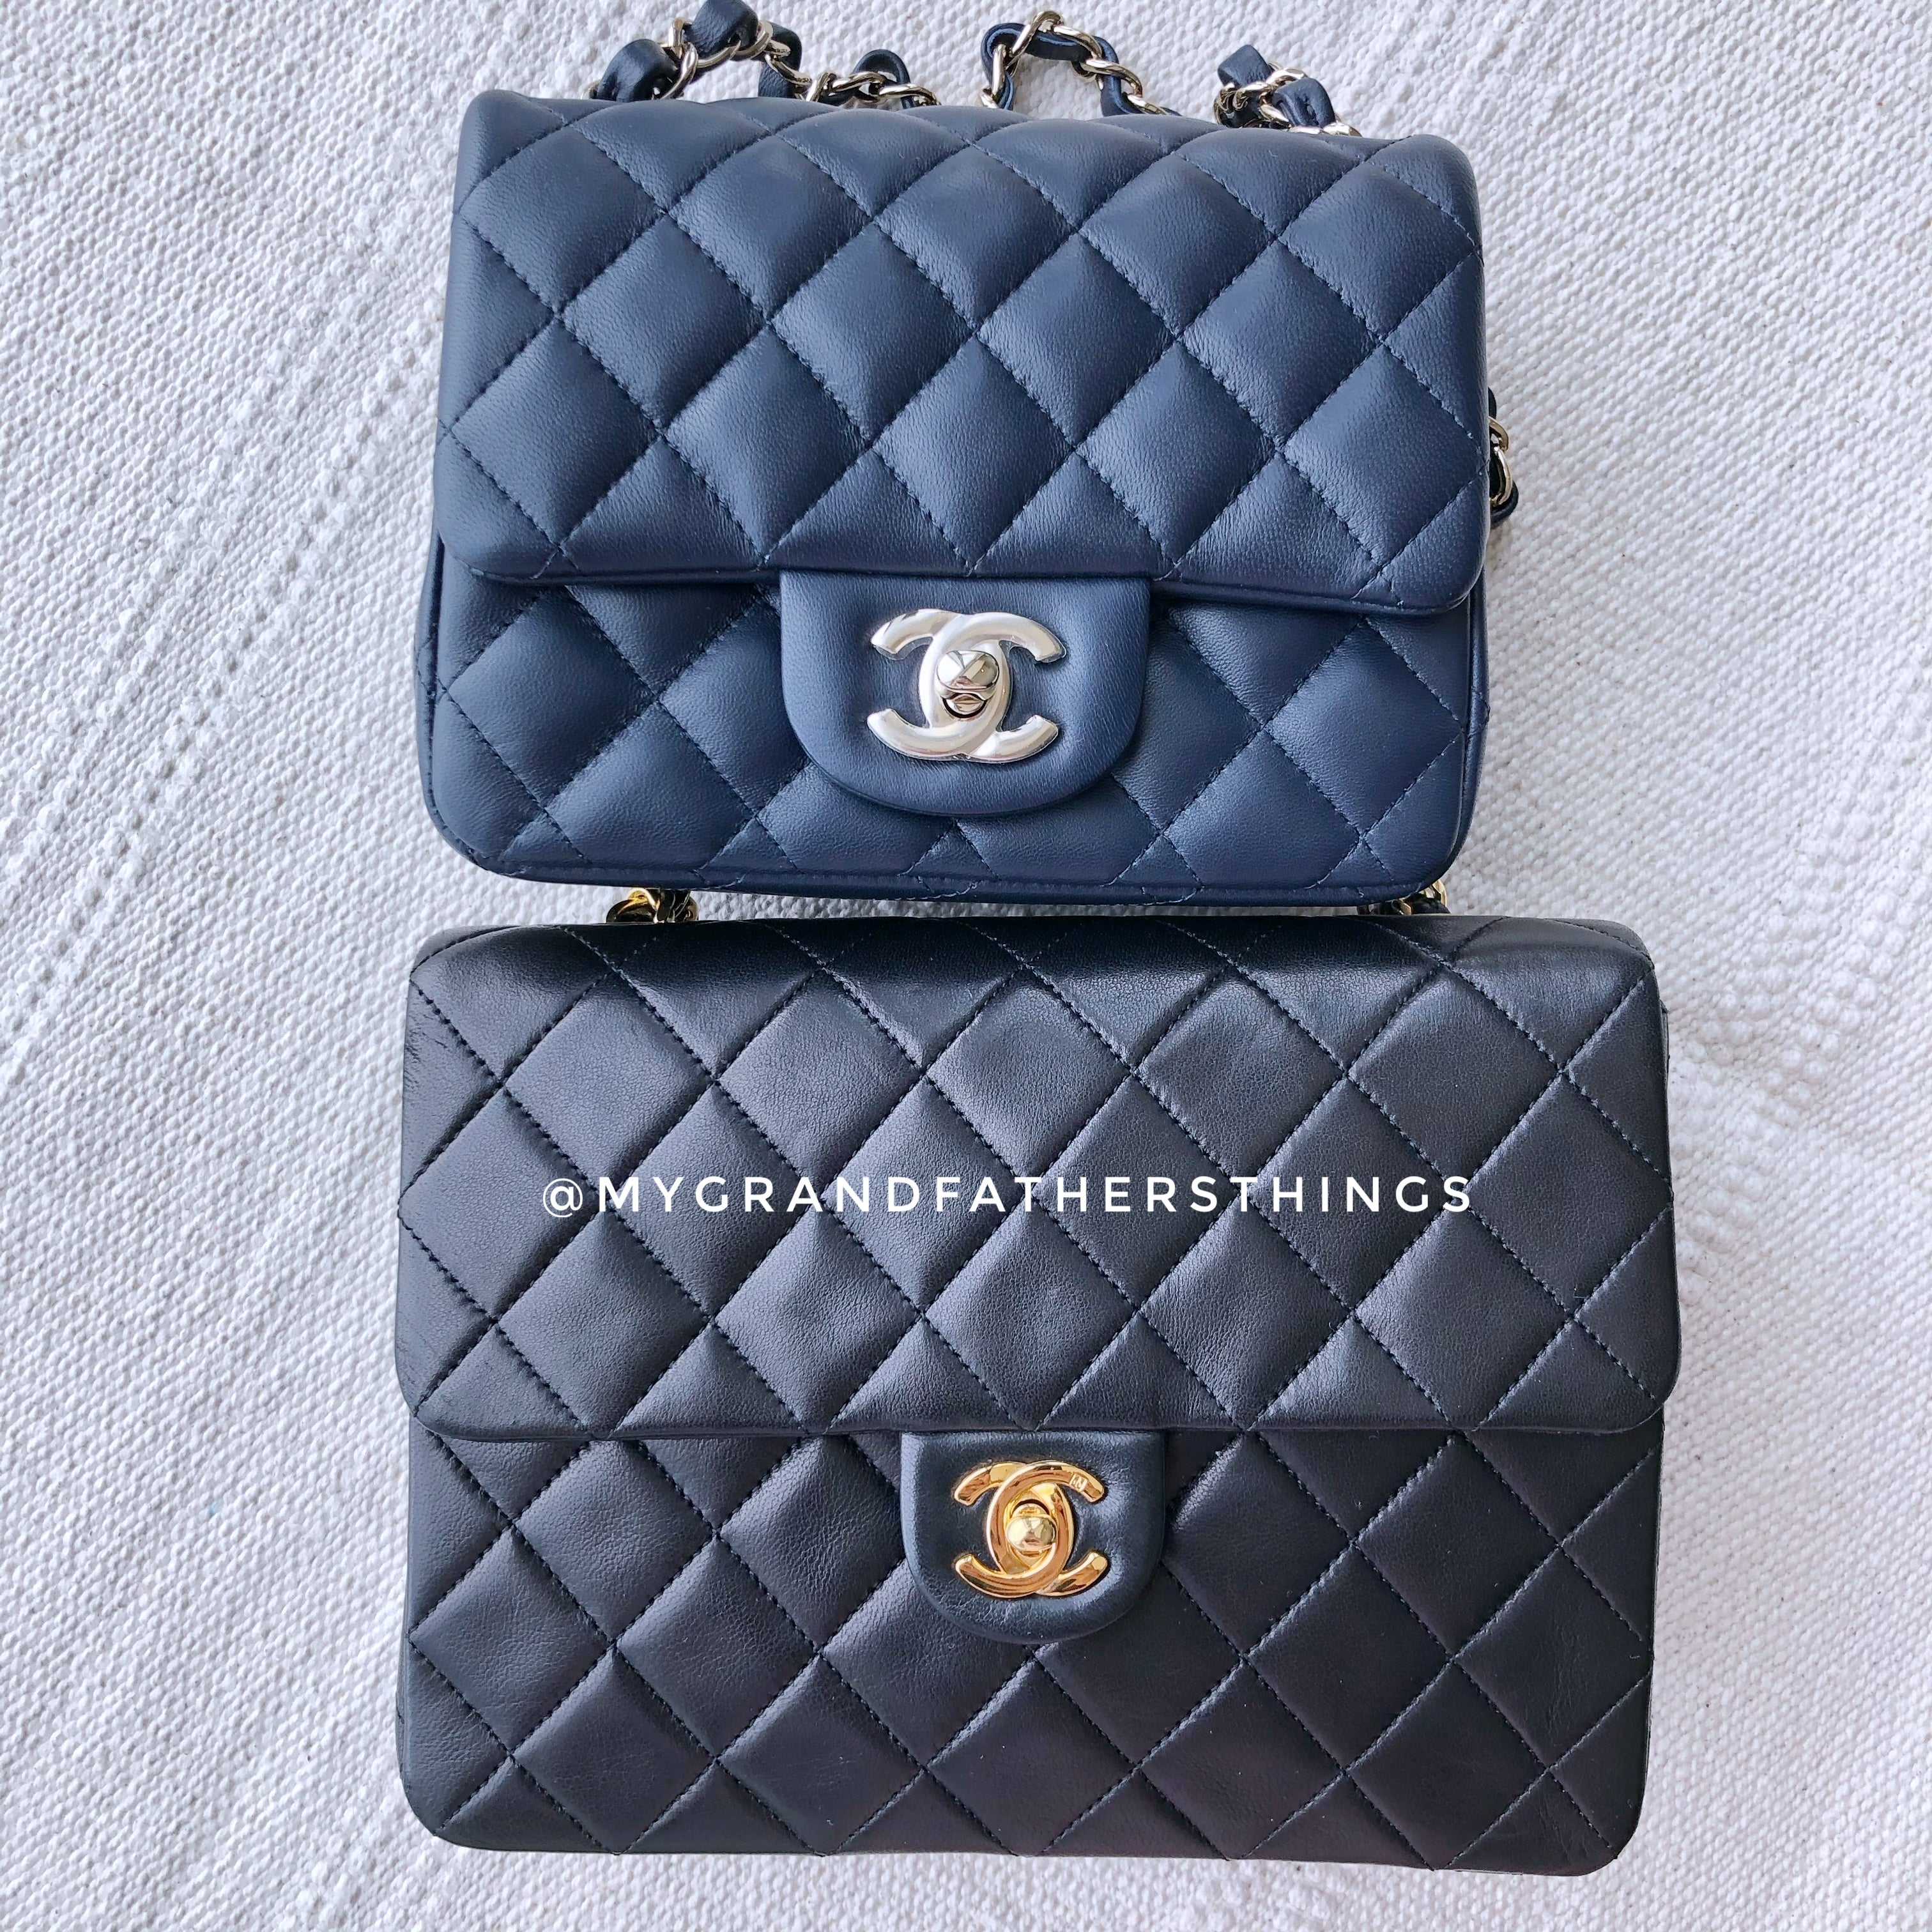 Chanel Square Mini - The Ultimate Showdown – My Grandfather's Things